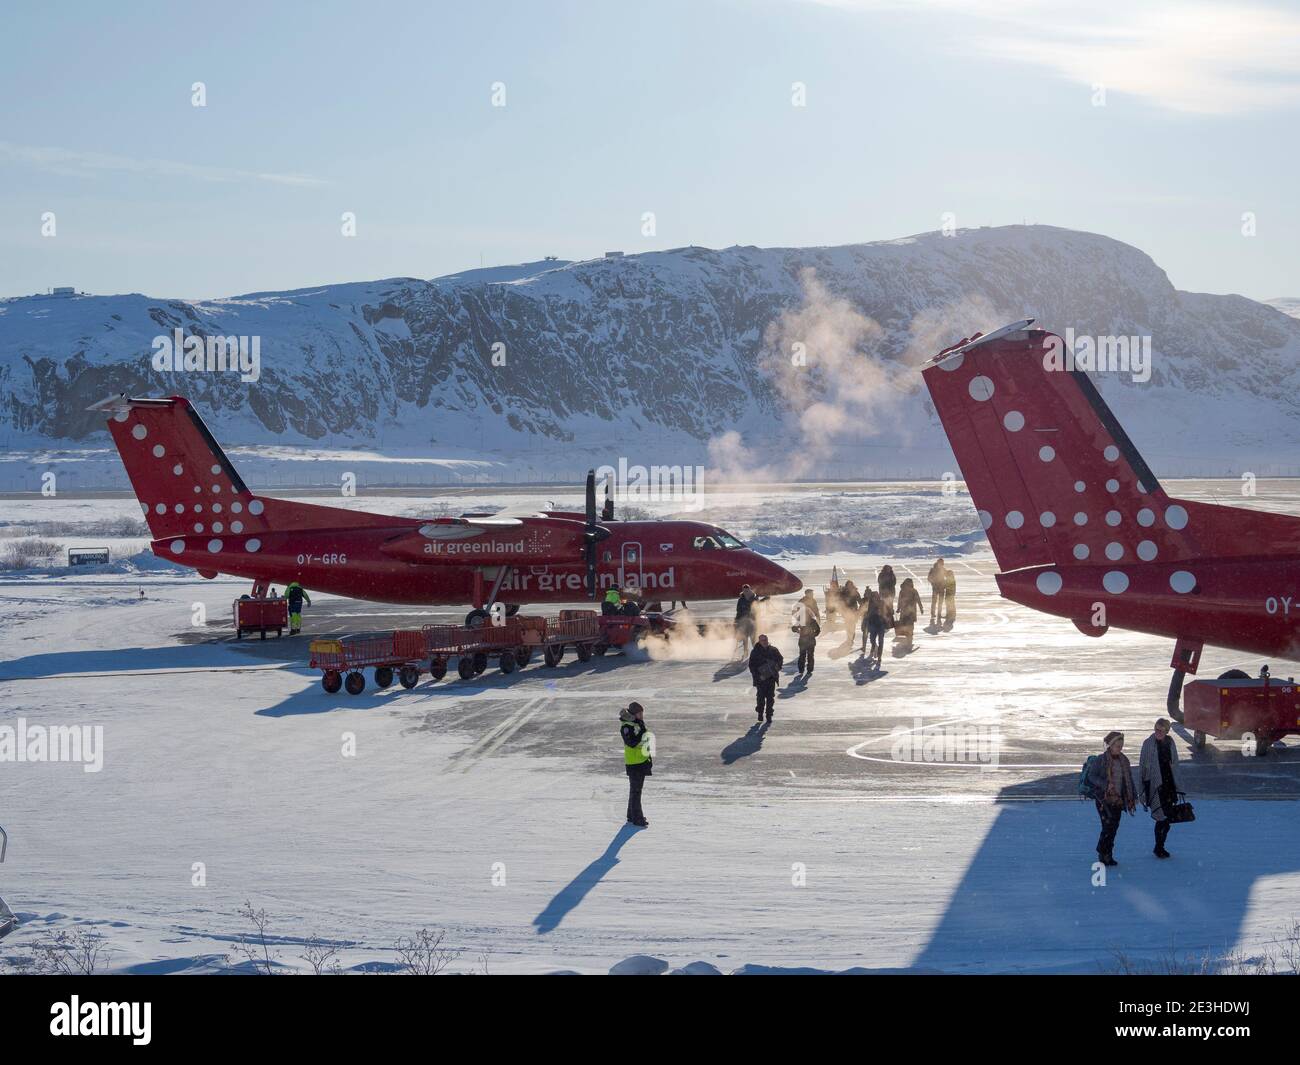 Kangerlussuaq airport during winter, the hub for all flights in Greenland. America, North America, Greenland Stock Photo